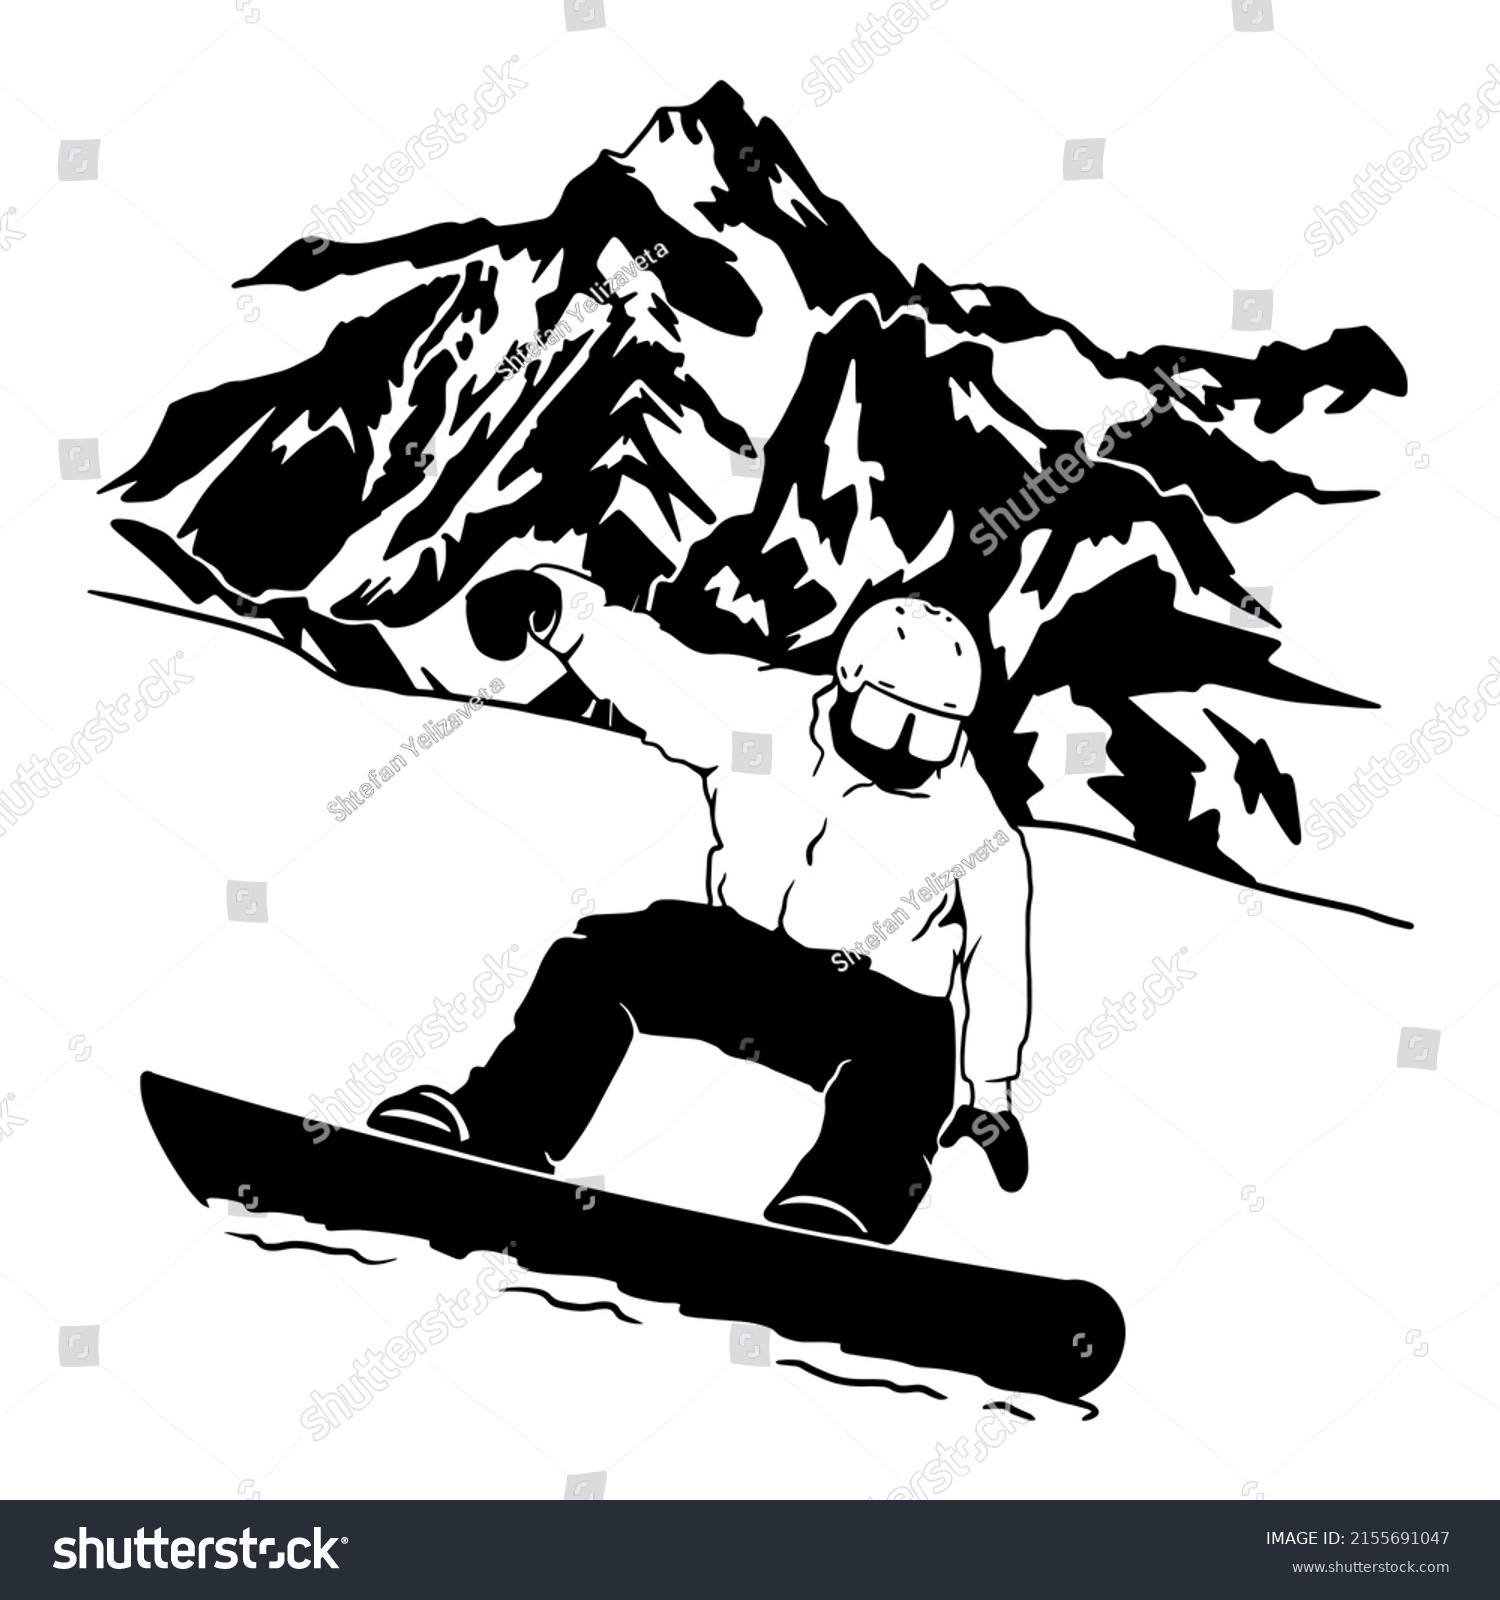 SVG of snowboarding vector illustration. Sports snowboarding. Mountain landscape. Snowboarder goggles. Vinyl cutting and printing file. svg